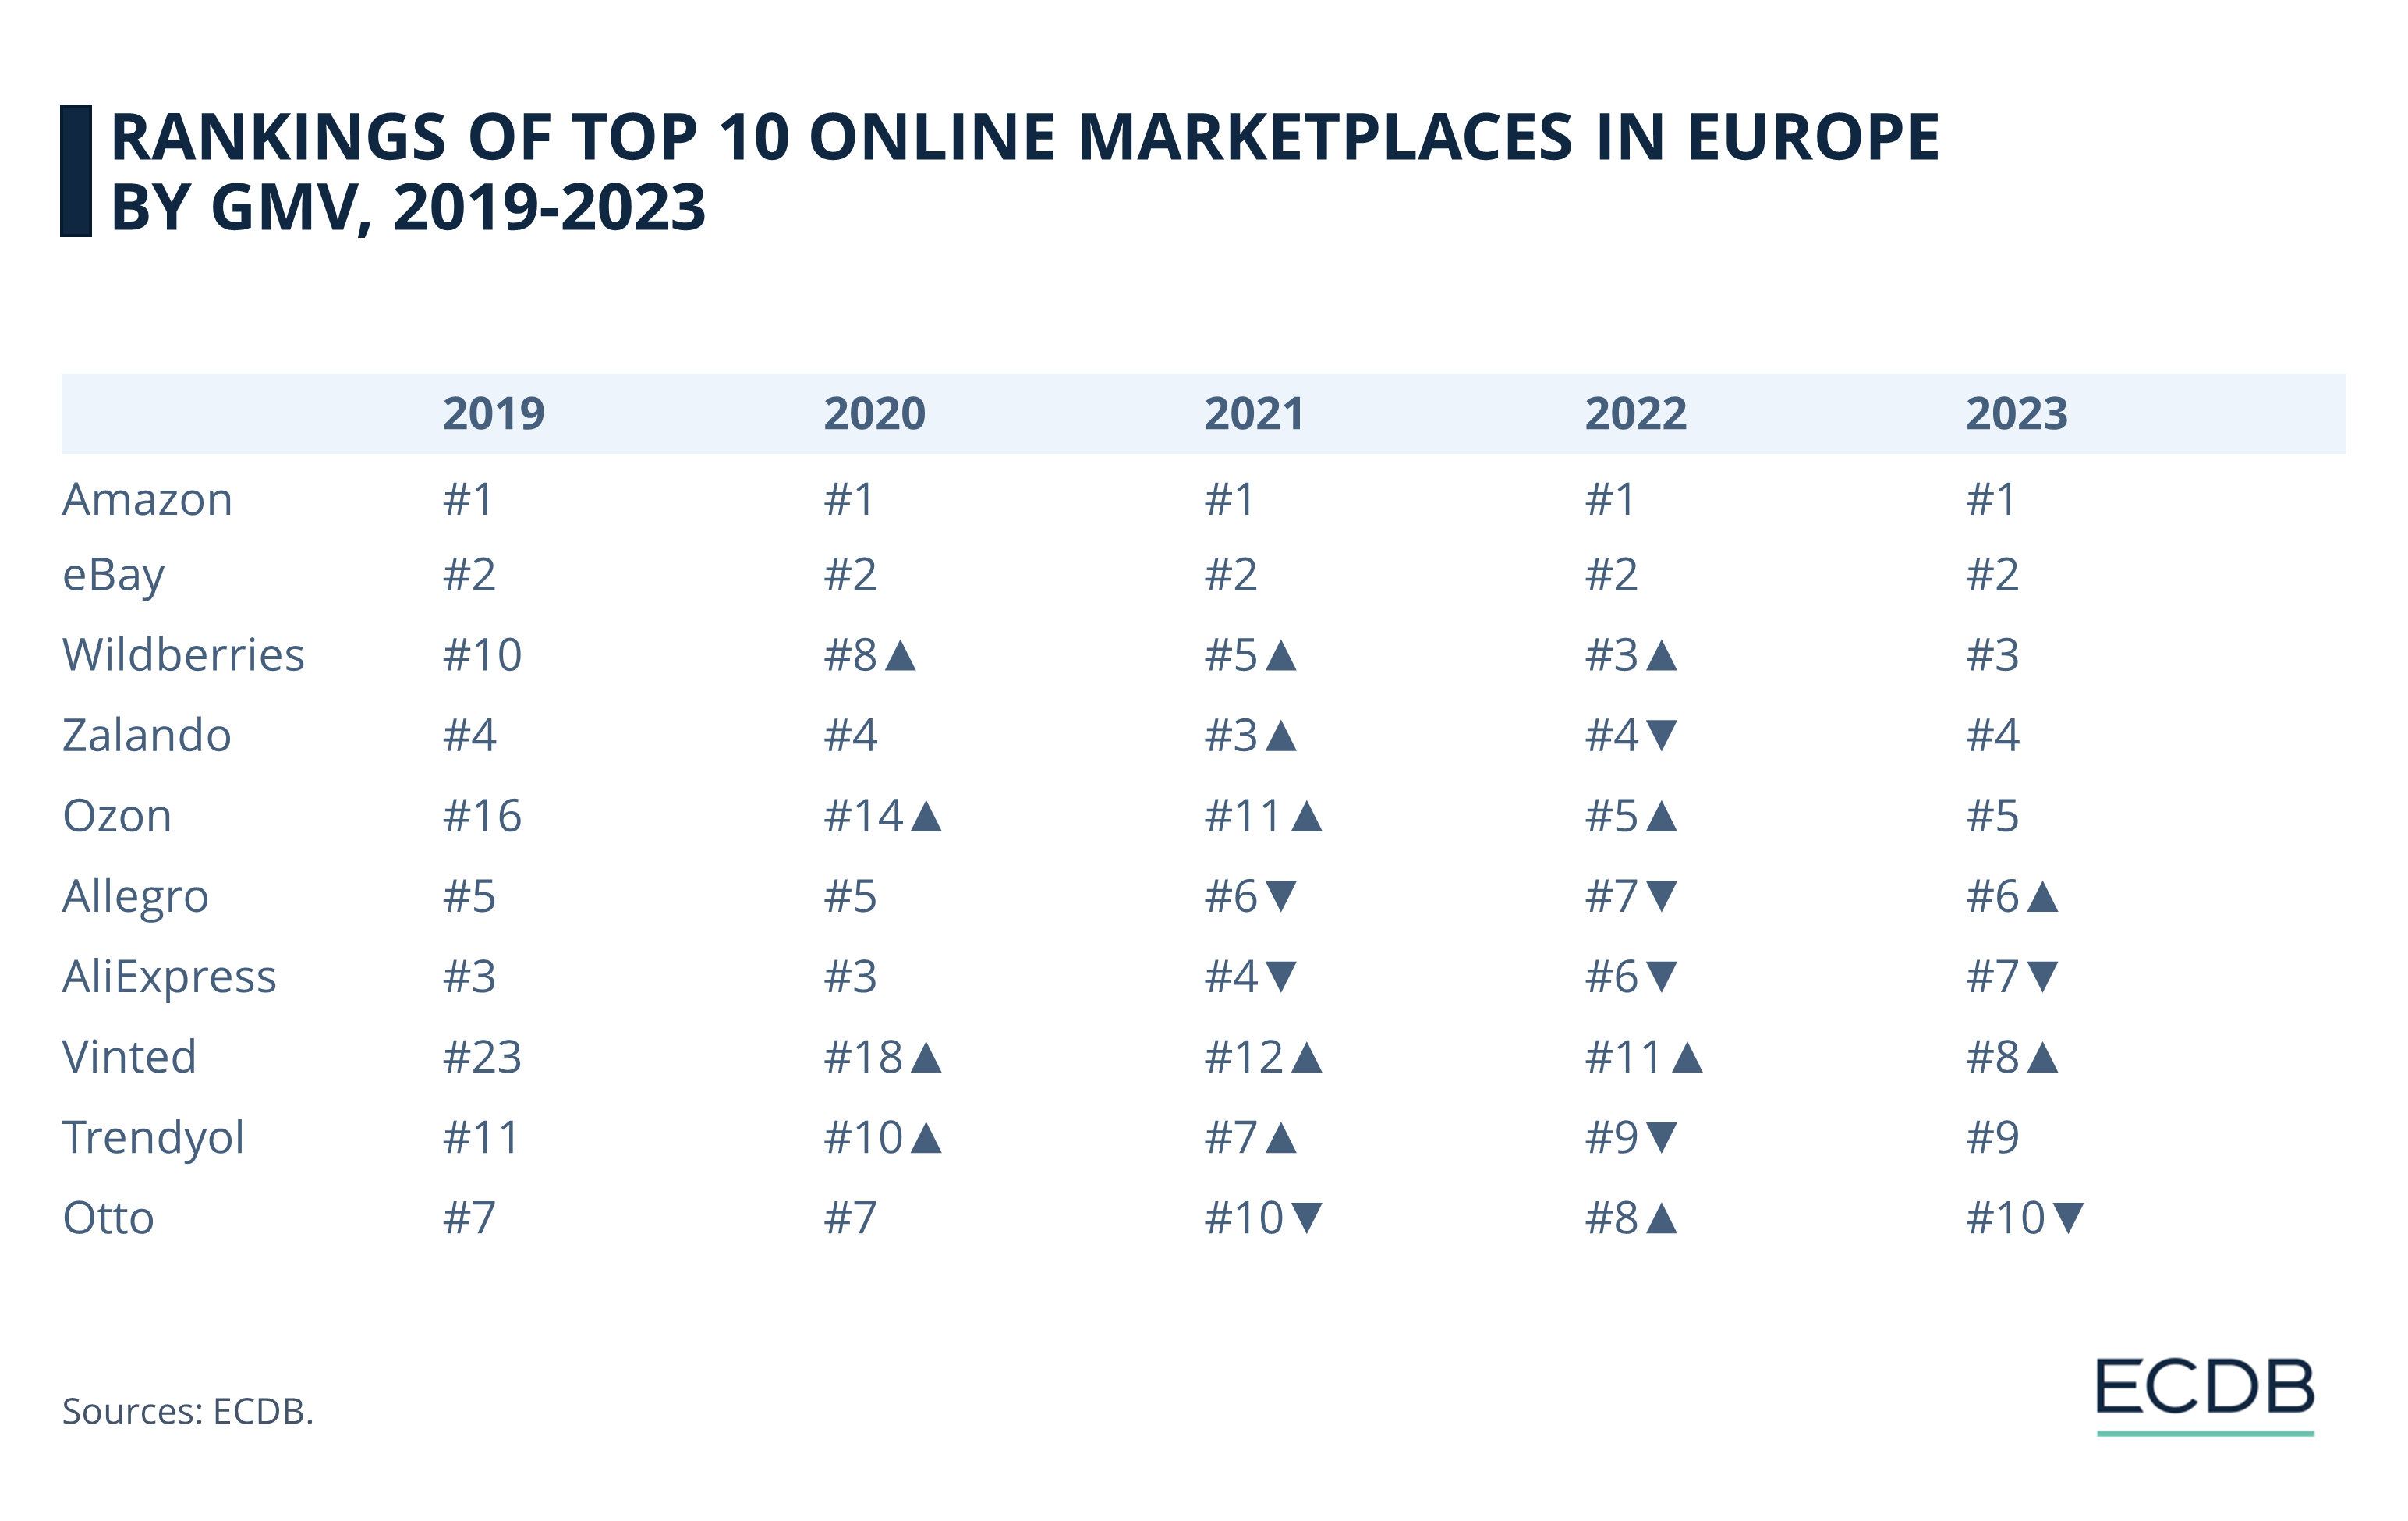 Rankings of Top 10 Online Marketplaces in Europe by GMV, 2023